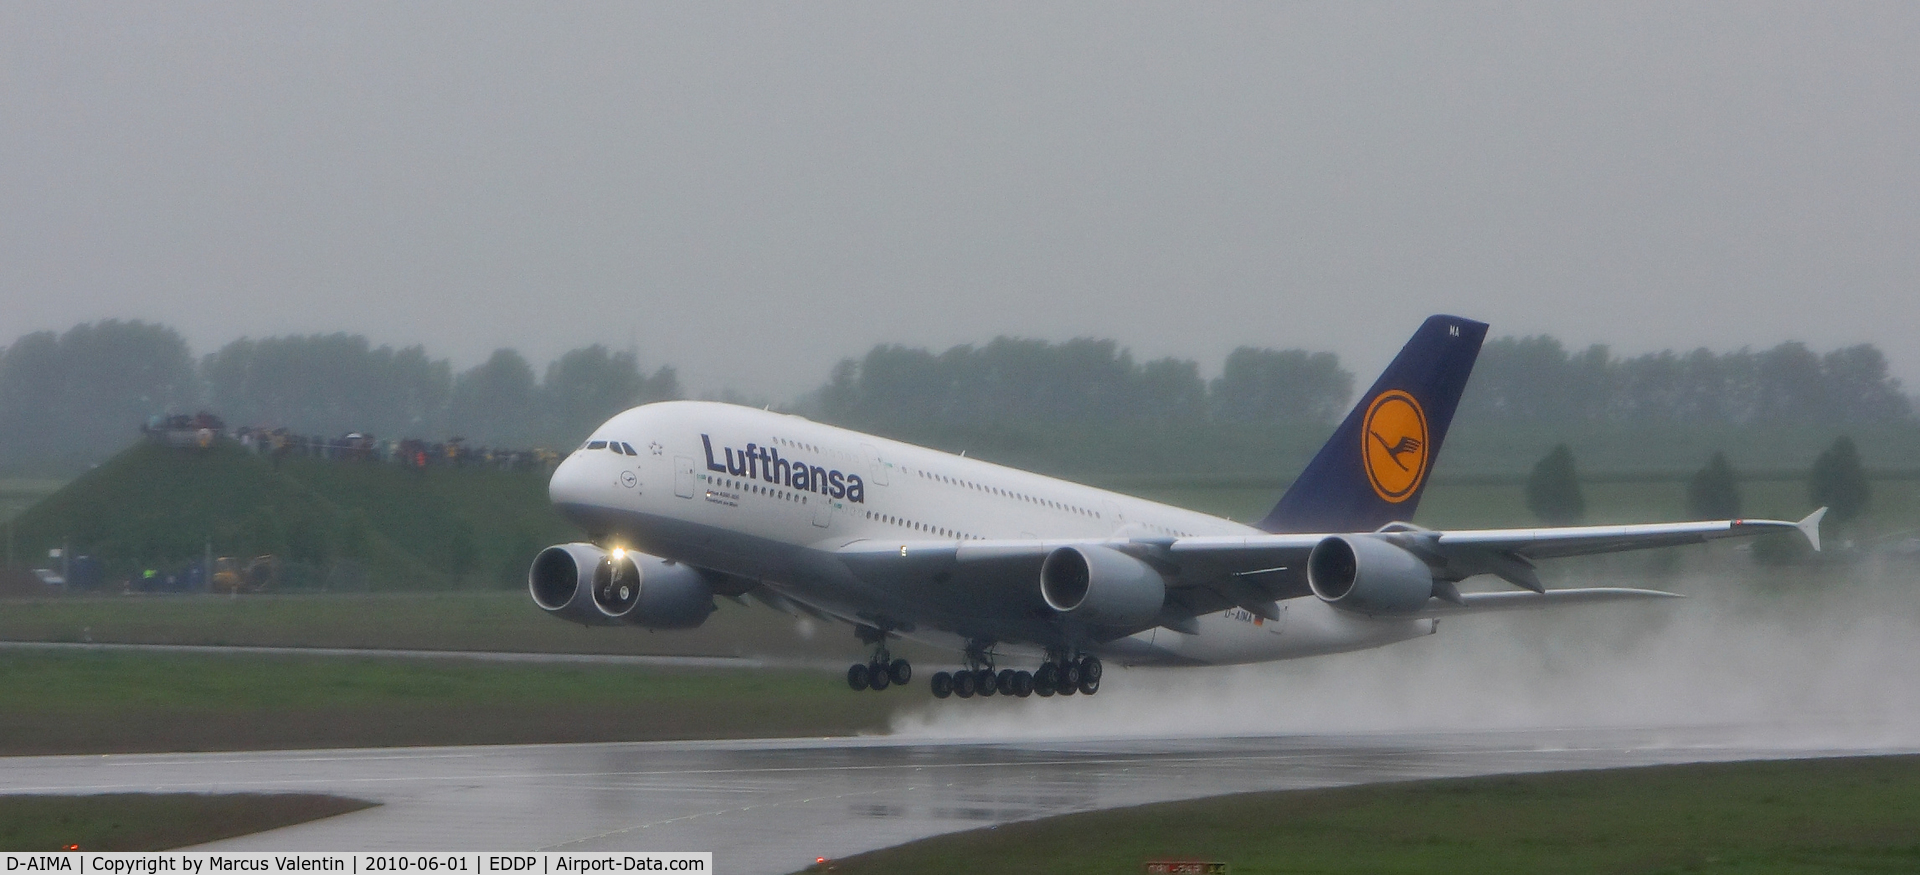 D-AIMA, 2010 Airbus A380-841 C/N 038, the first landing from the A380 / Lufthansa in leipzig youre welcome. what a bad weather for that nice aircraft.